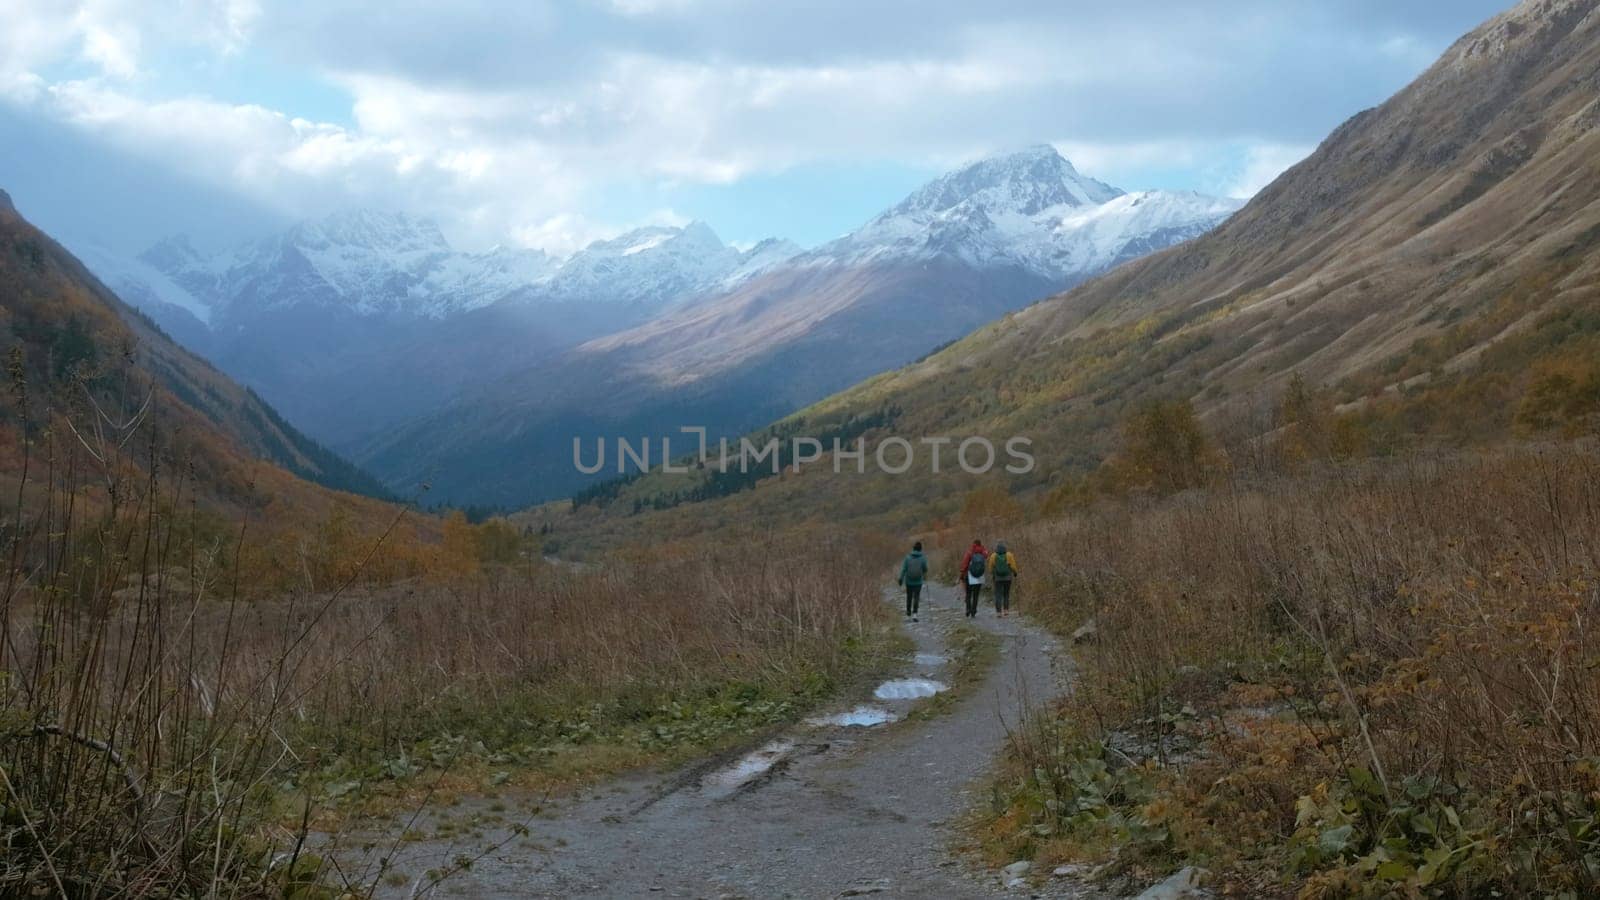 Tourists walk along trail in mountain valley in autumn. Creative. Hiking in mountain valley on cloudy autumn day. Trail in mountain valley with beautiful landscape of snowy peaks and cloudy sky.